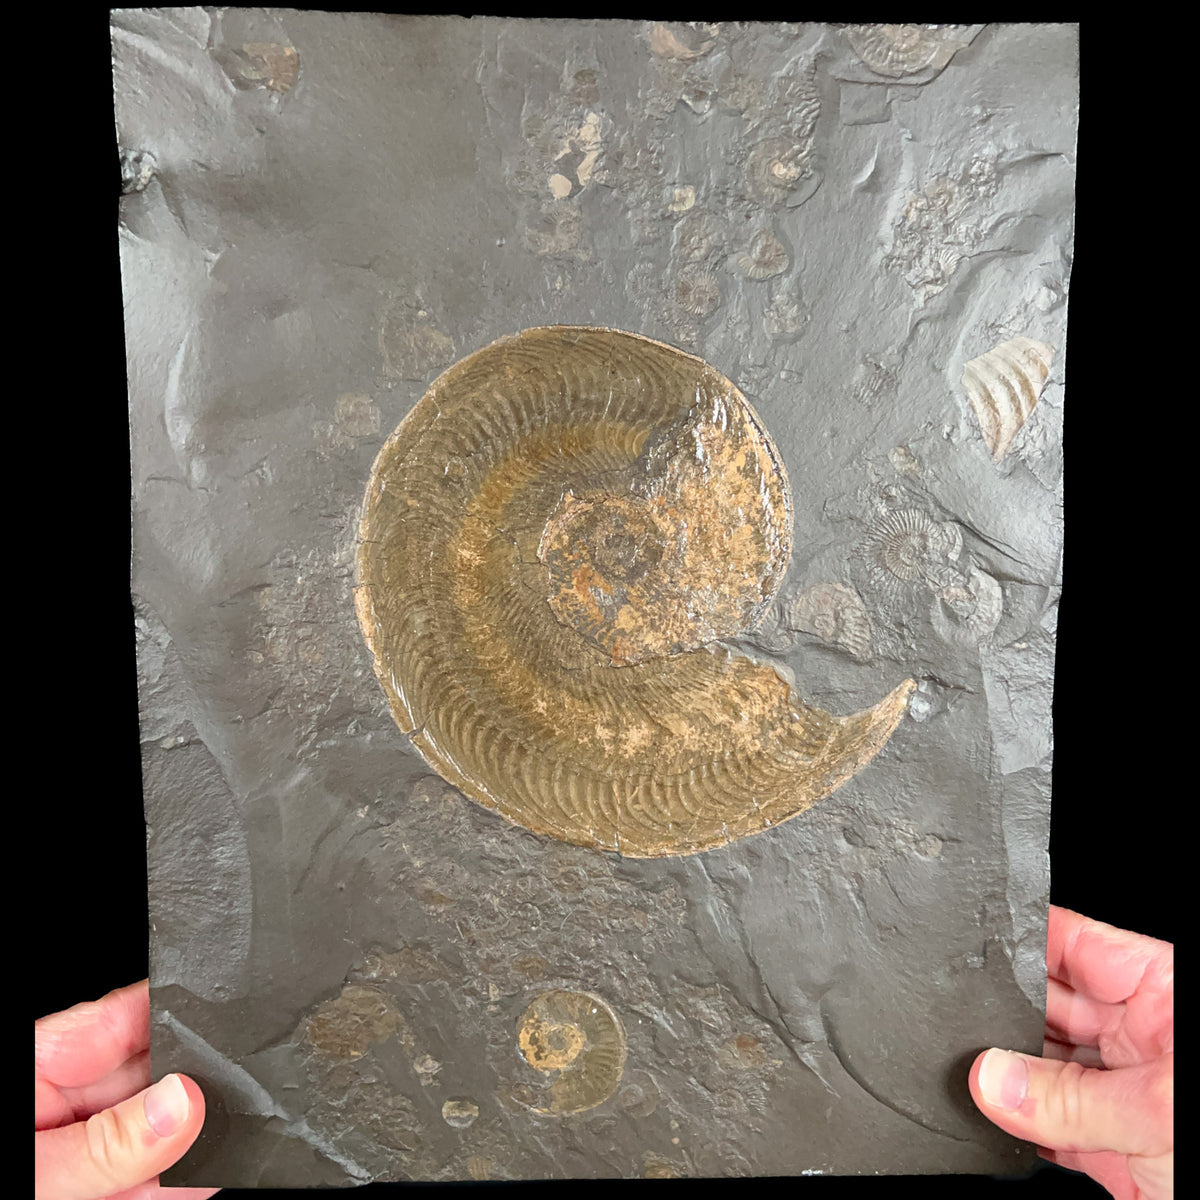 Large Harpoceras Ammonite Fossil Plate from Holzmaden Germany